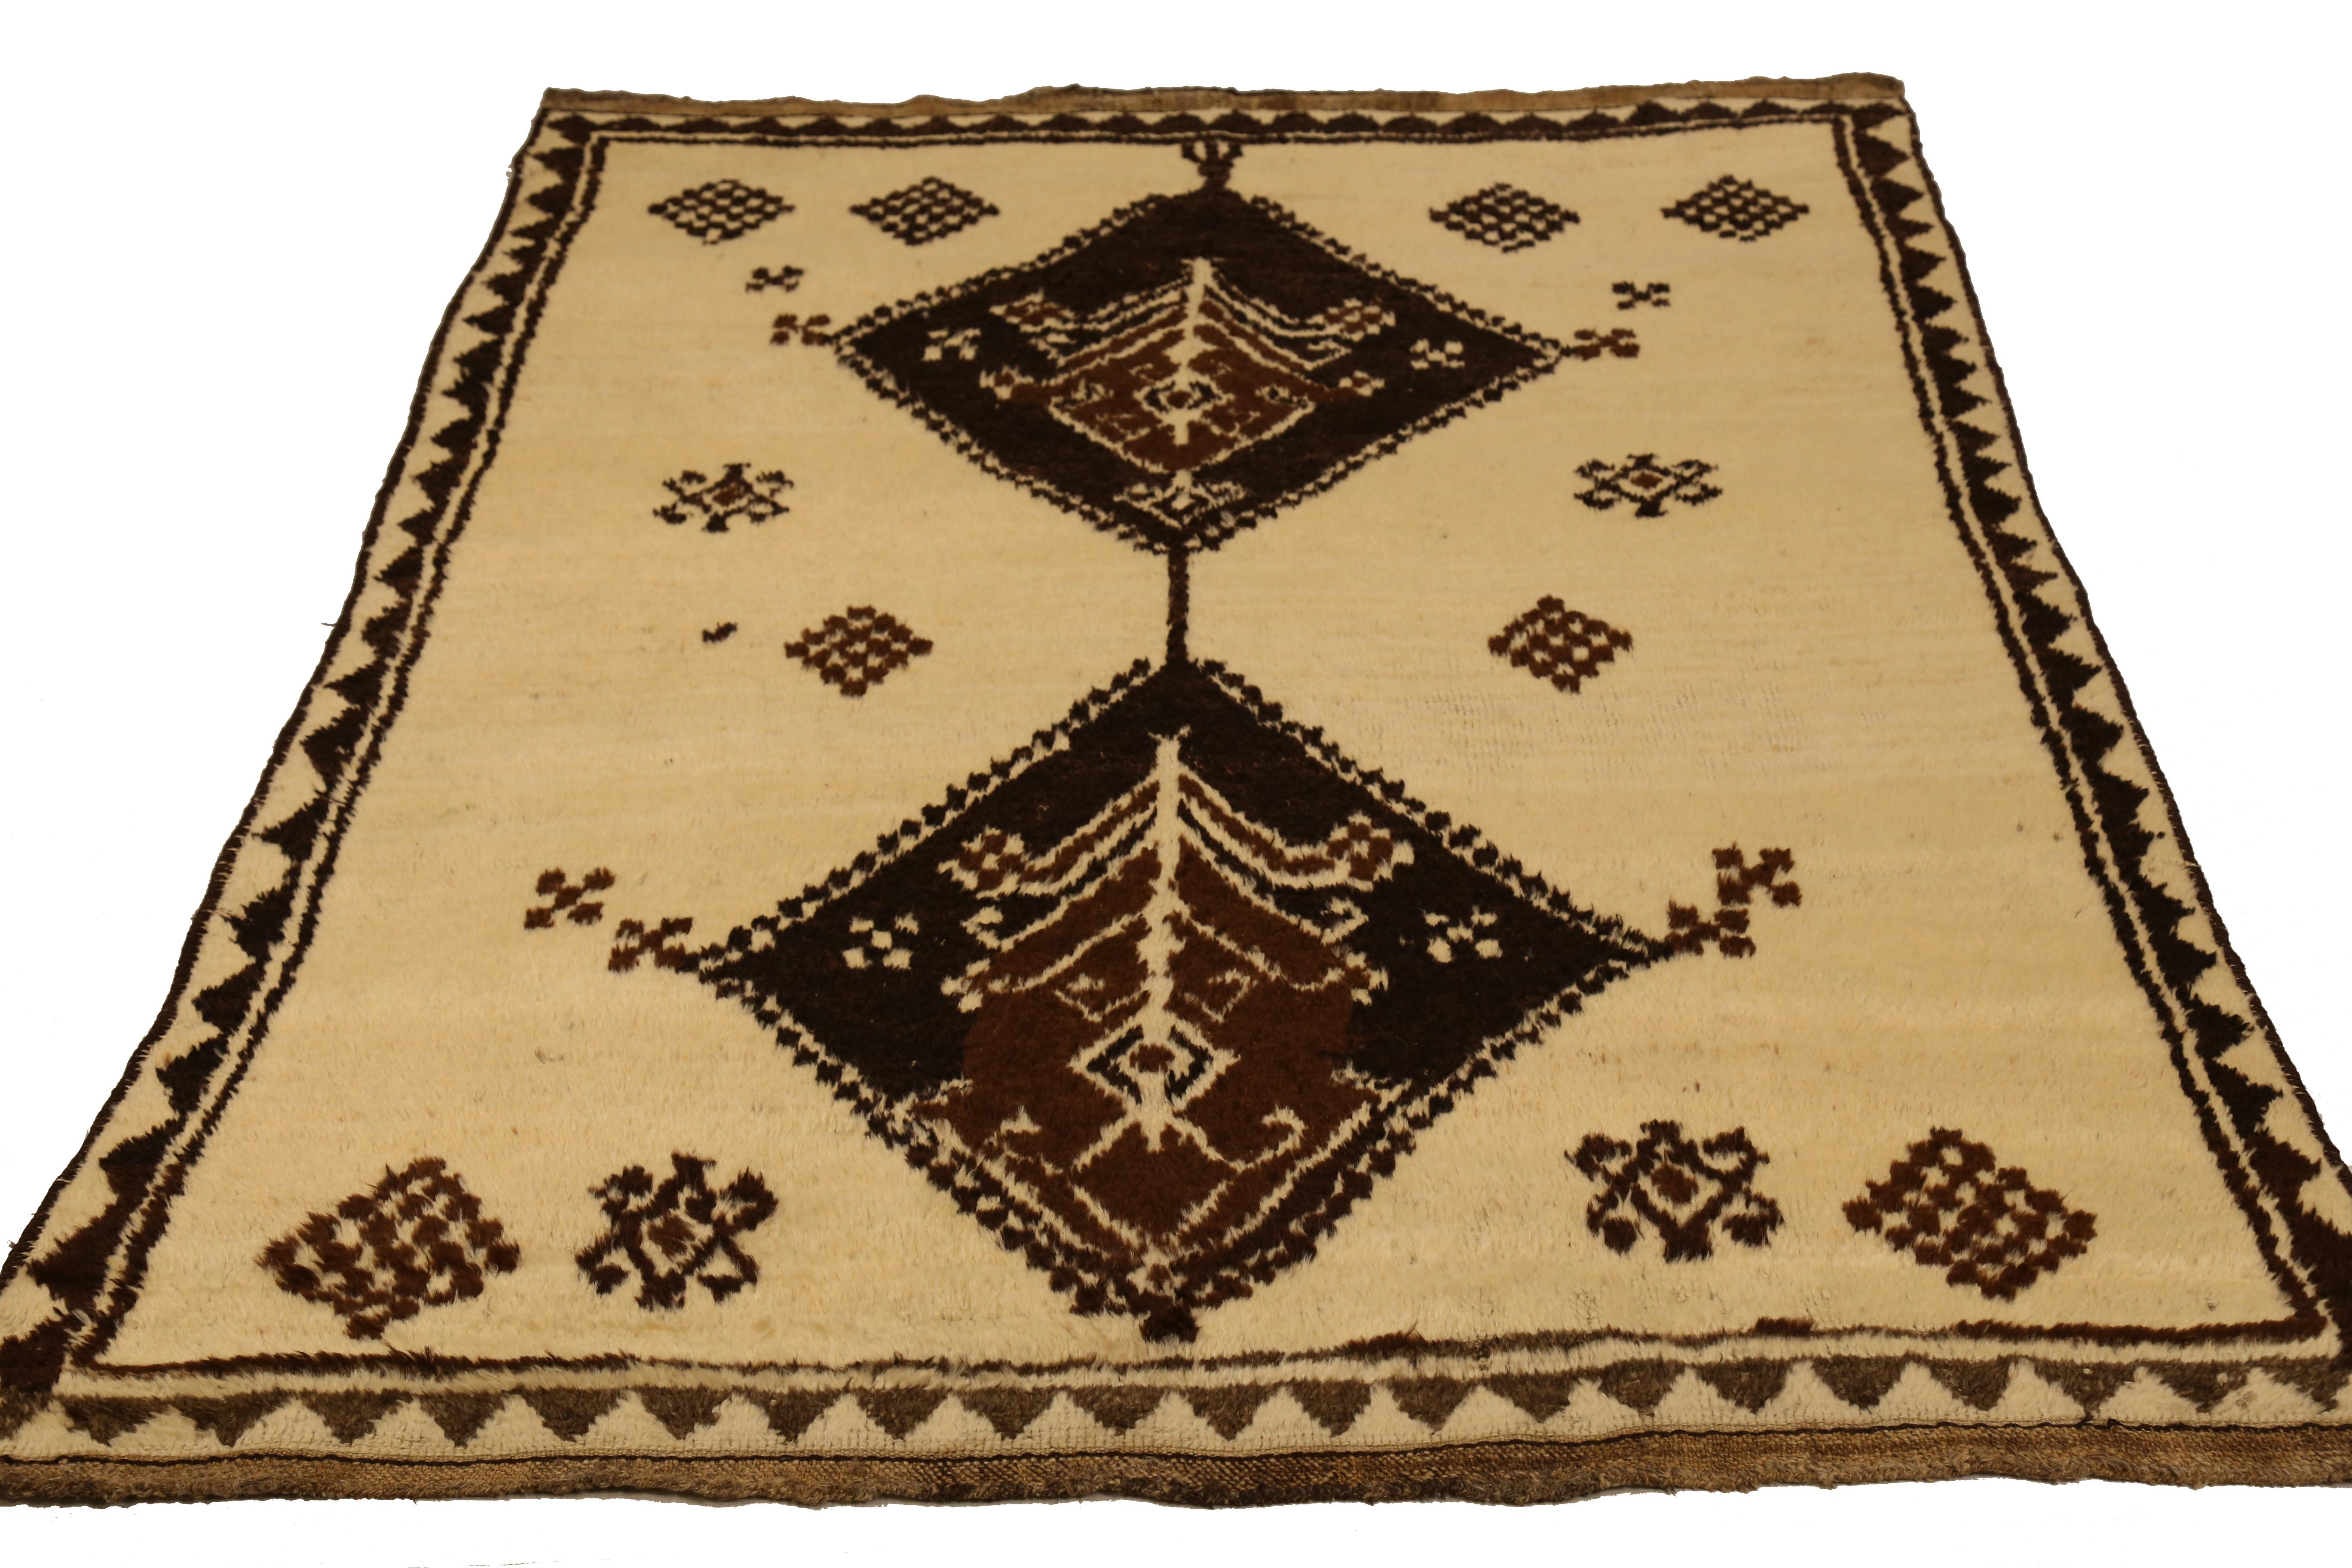 Revised:

This stunning hand-knotted Persian accent rug is a true work of art, crafted from fine wool and all-natural vegetable dyes that are safe for both people and pets. Featuring simple yet elegant geometric patterns in rich brown hues set